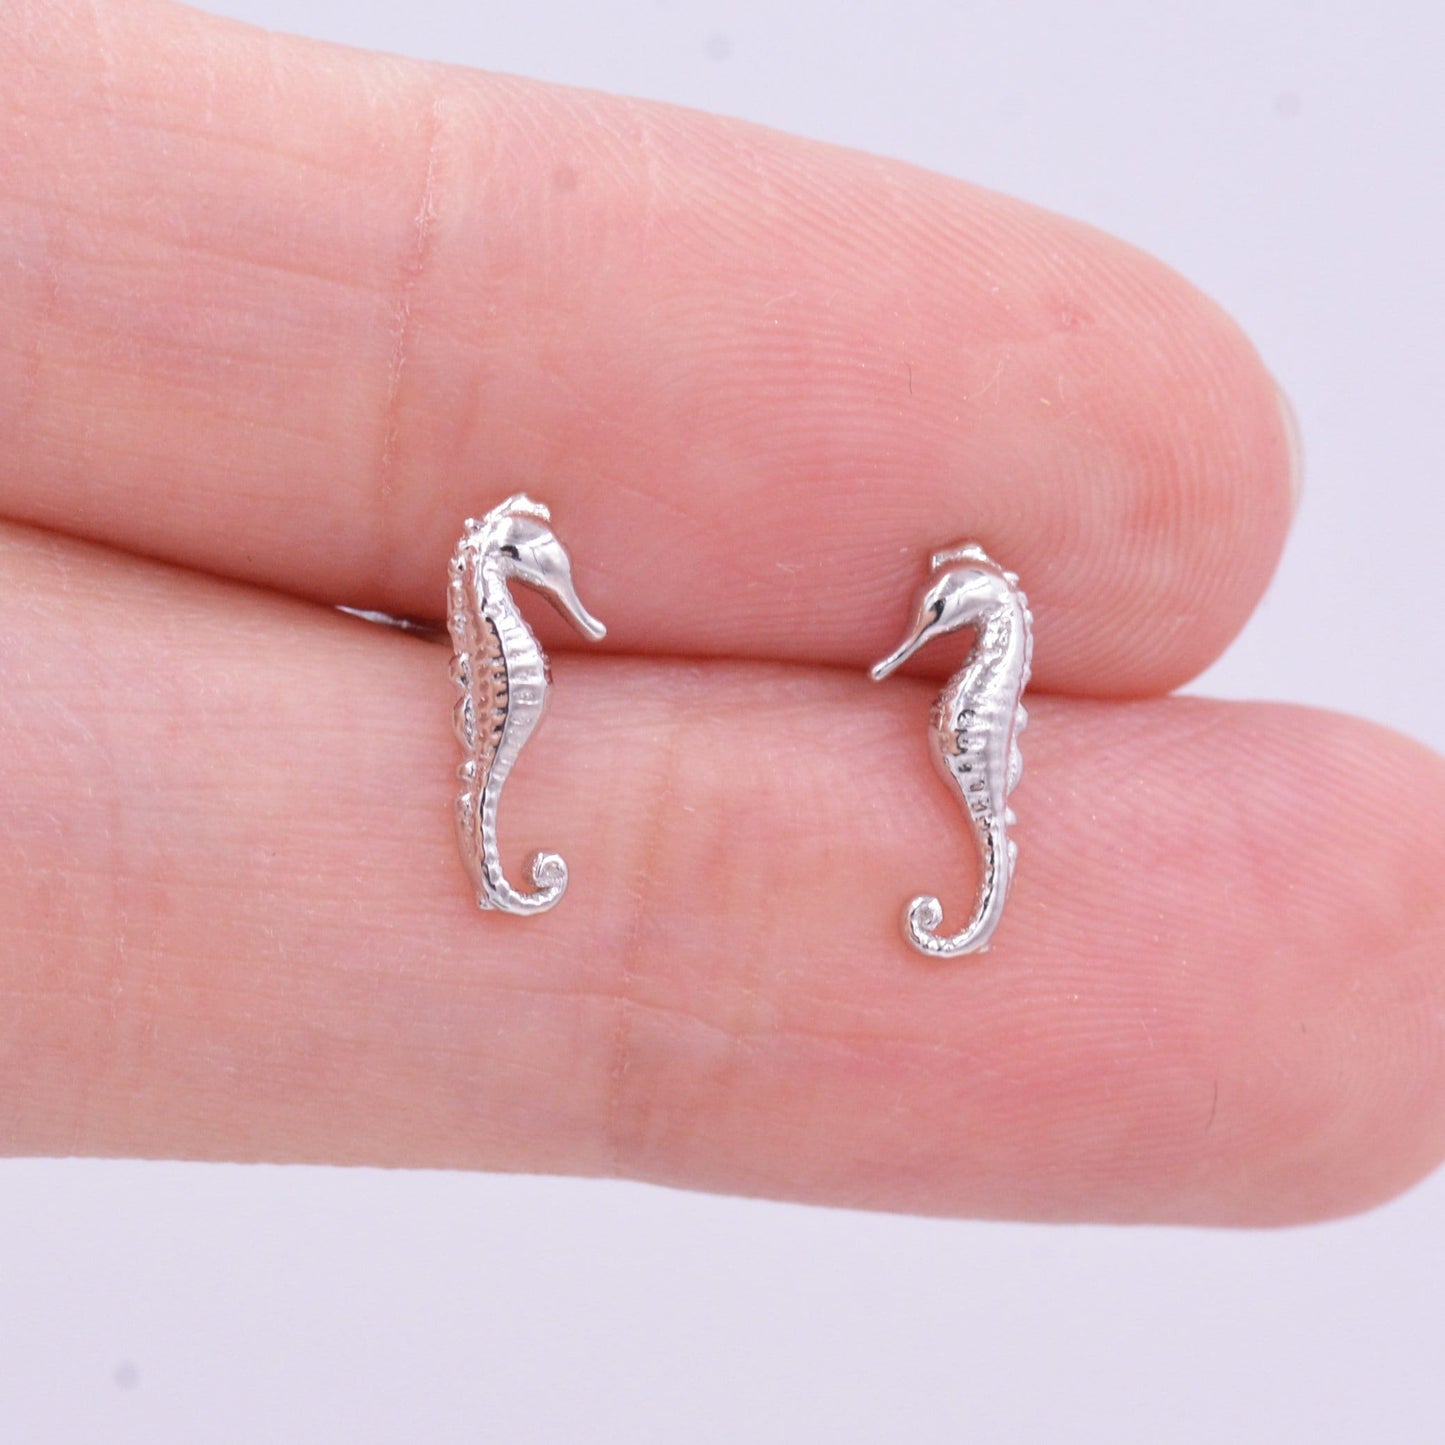 Little Seahorse Fish Stud Earrings in Sterling Silver, Cute Fun Quirky Animal Jewellery, Gift for Her, Animal Lover,  Nature Inspired